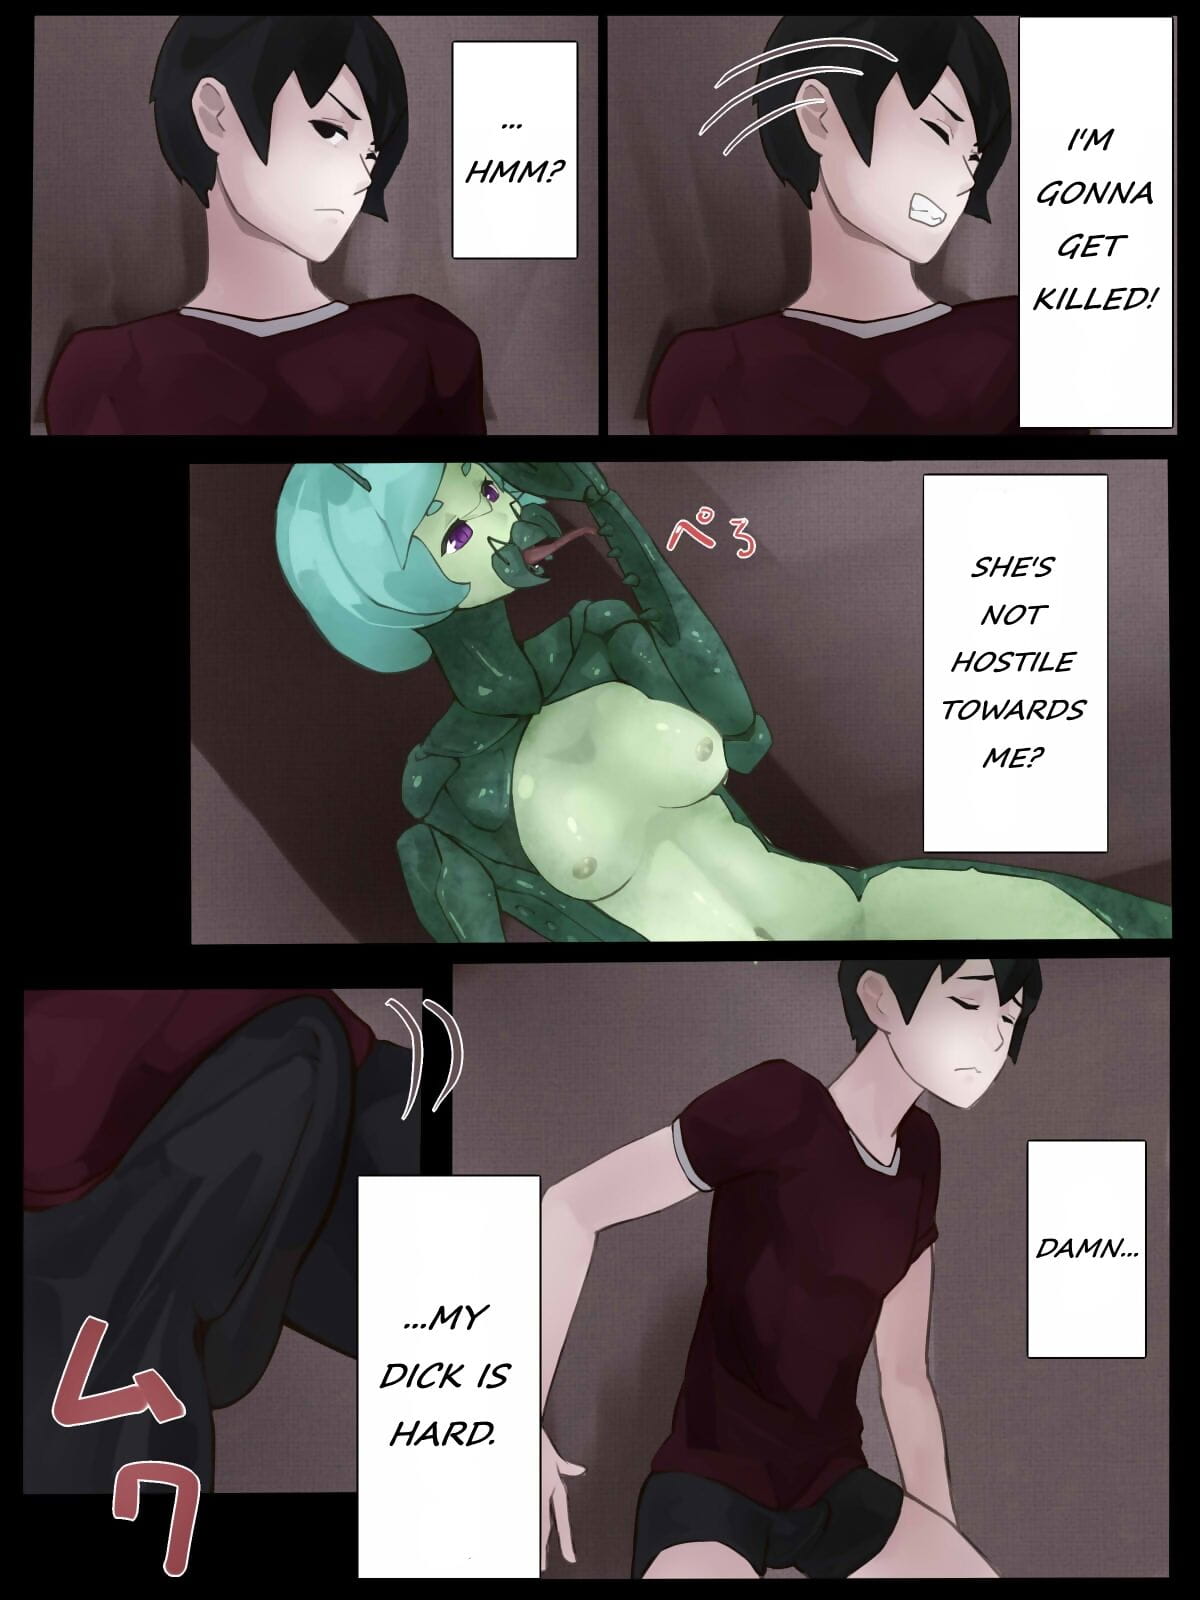 Sex with Mantis Girl -Report of Humanizer Virus Infection- page 1